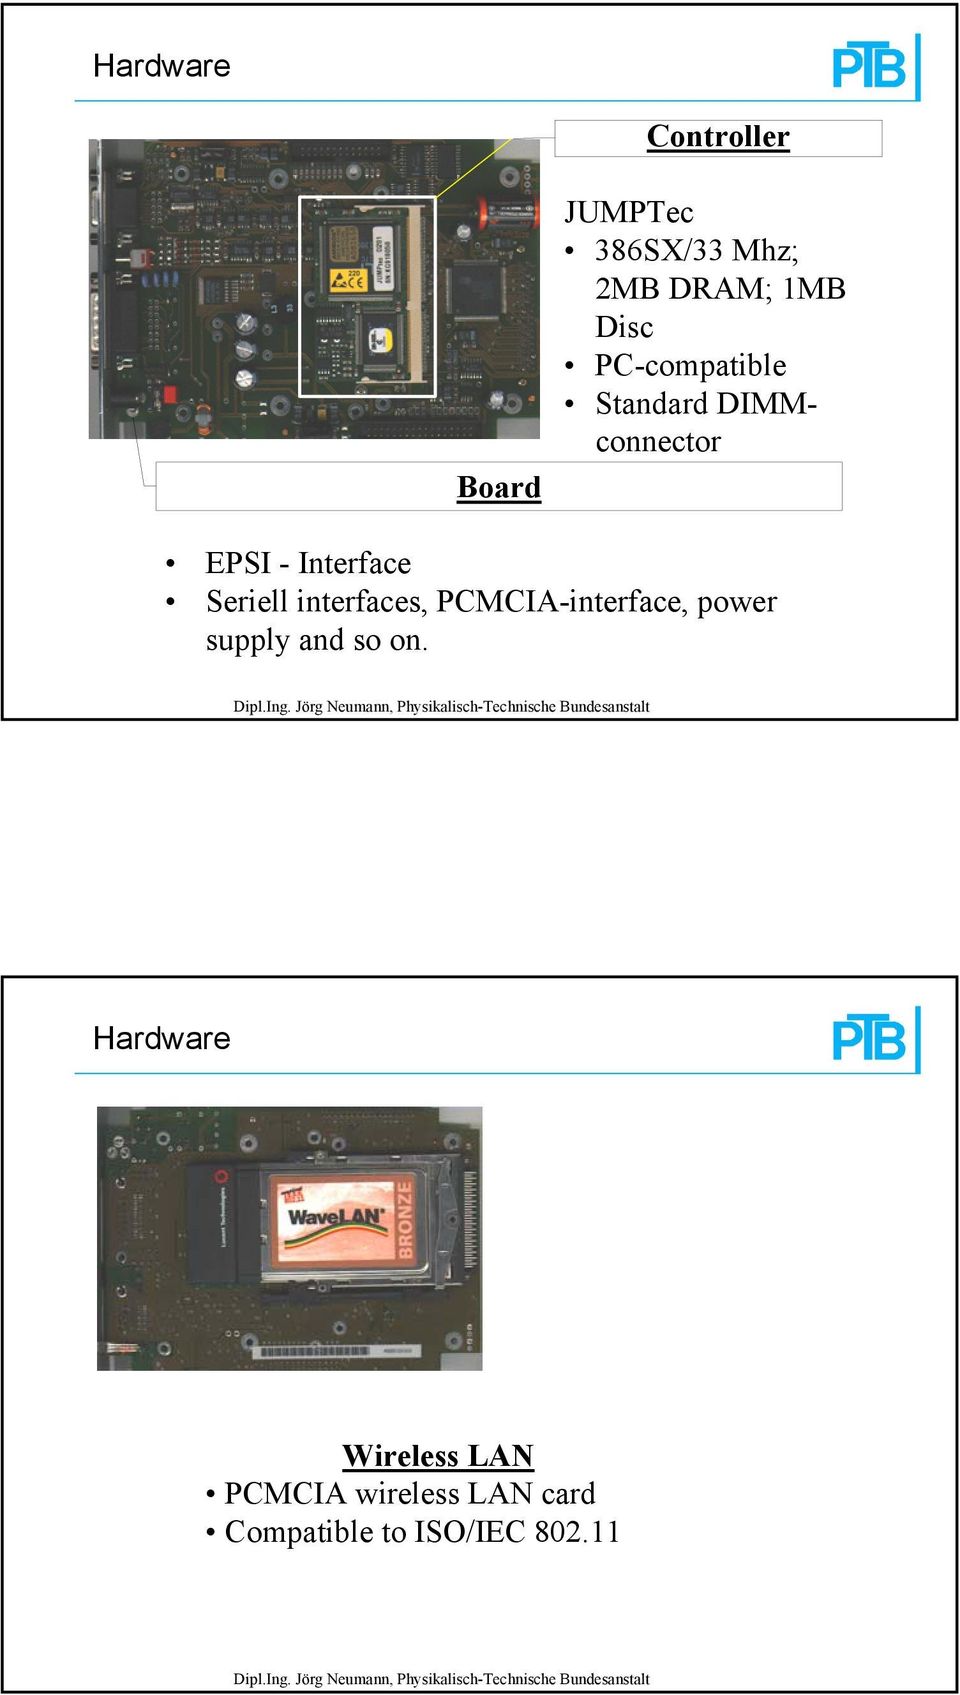 Seriell interfaces, PCMCIA-interface, power supply and so on.